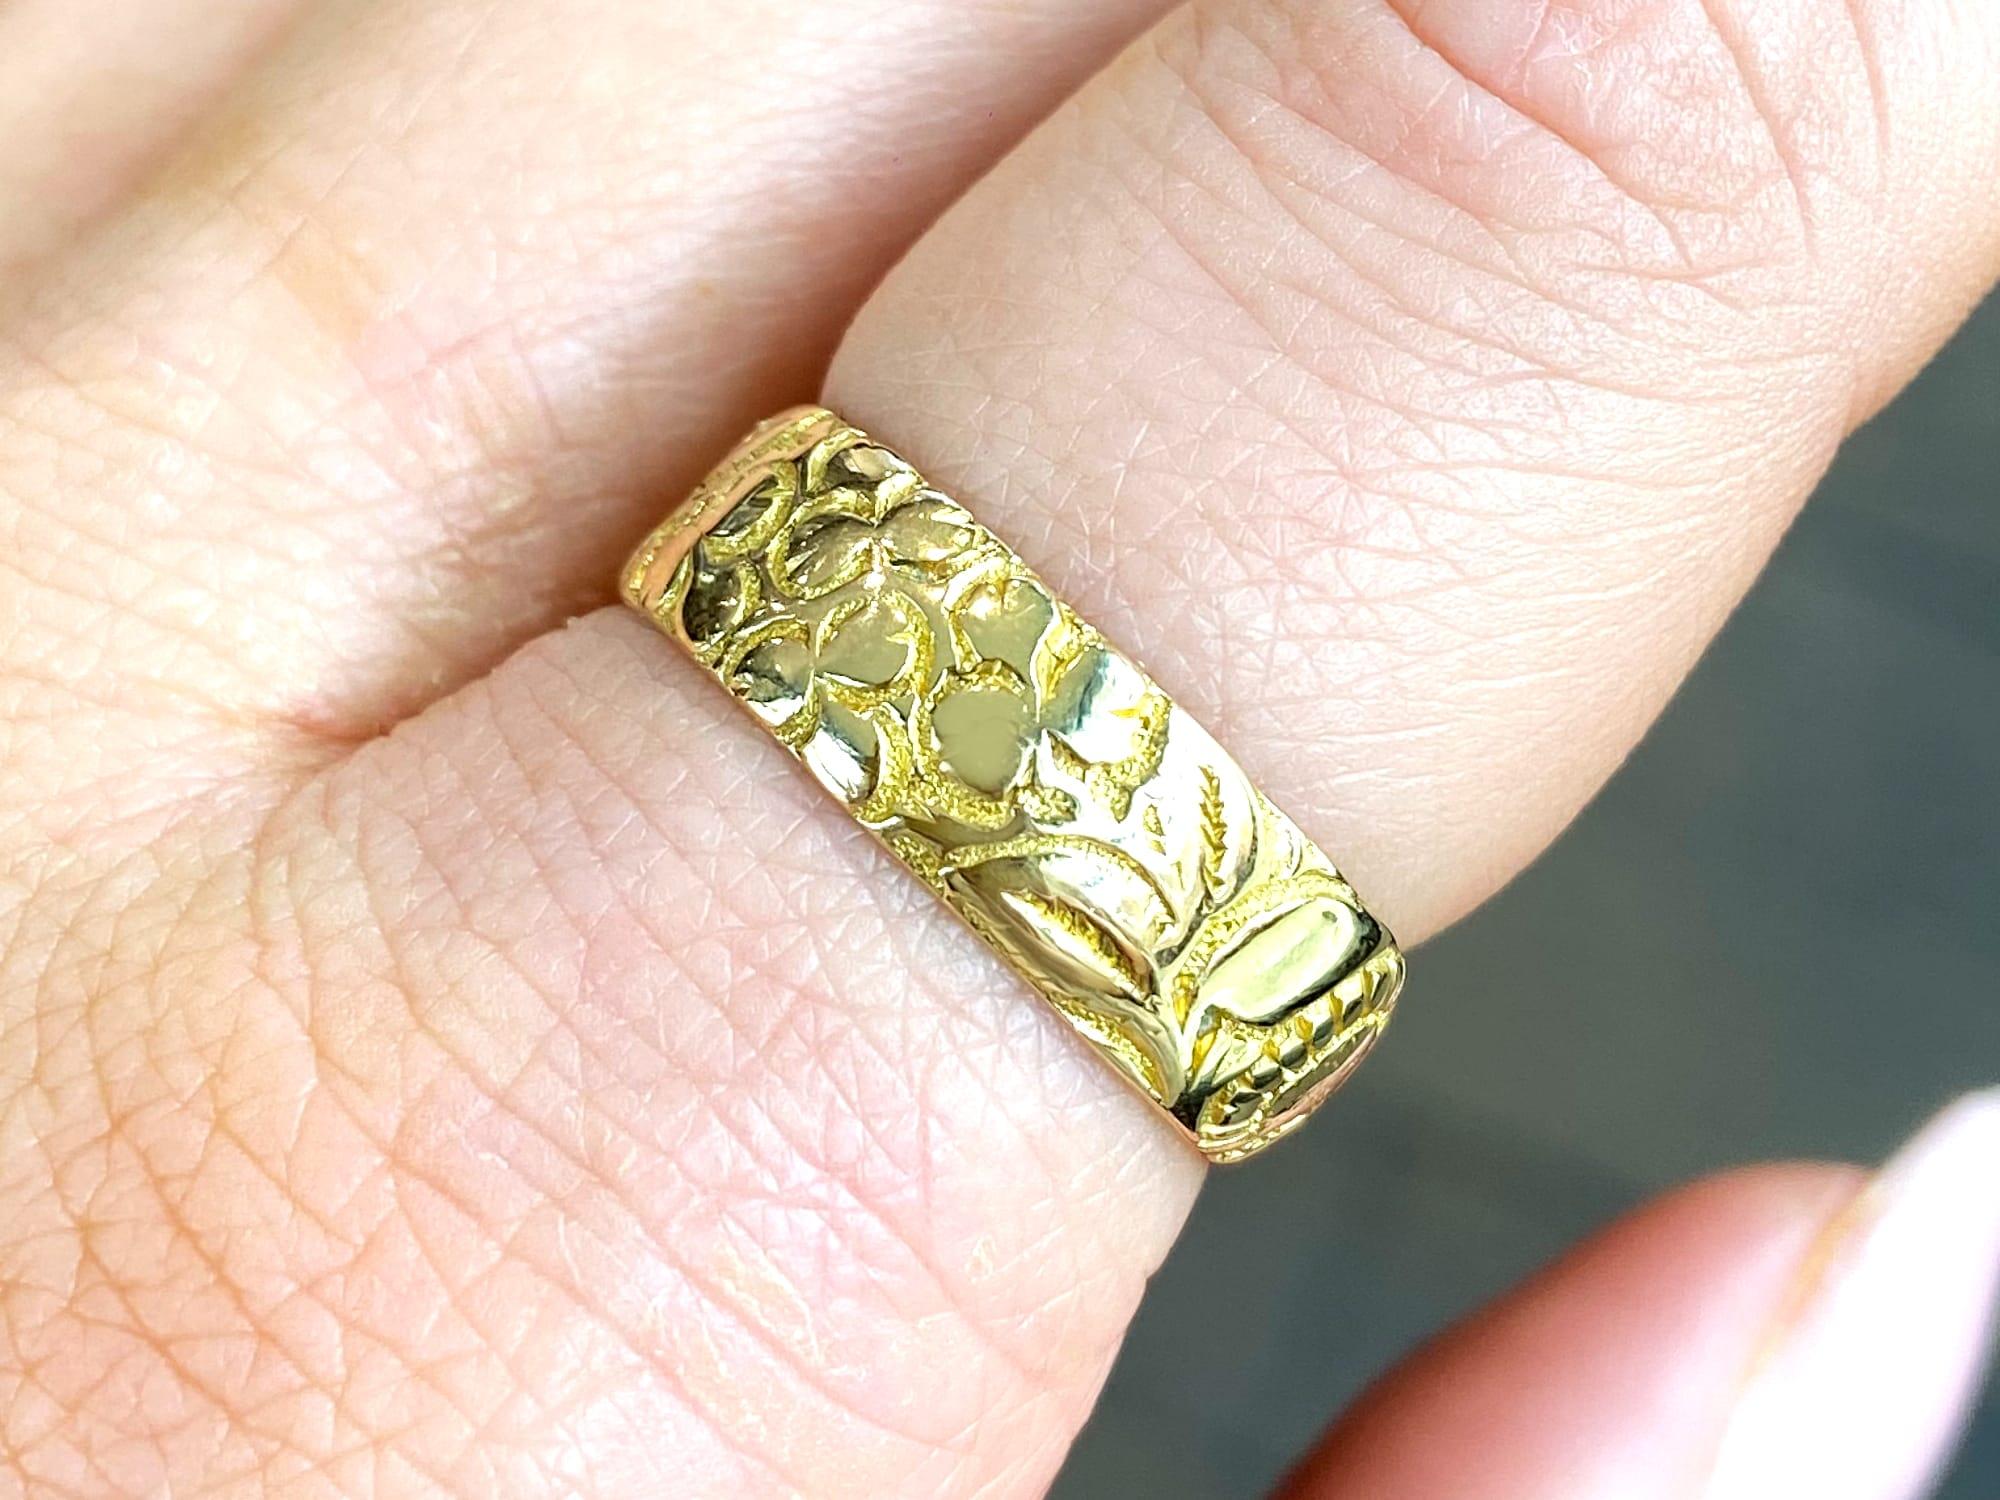 A fine and impressive antique Victorian 18 karat yellow gold wedding band; part of our diverse antique Victorian rings and estate jewelry collections.

This exceptional, fine and impressive antique Victorian wedding band has been crafted in 18k